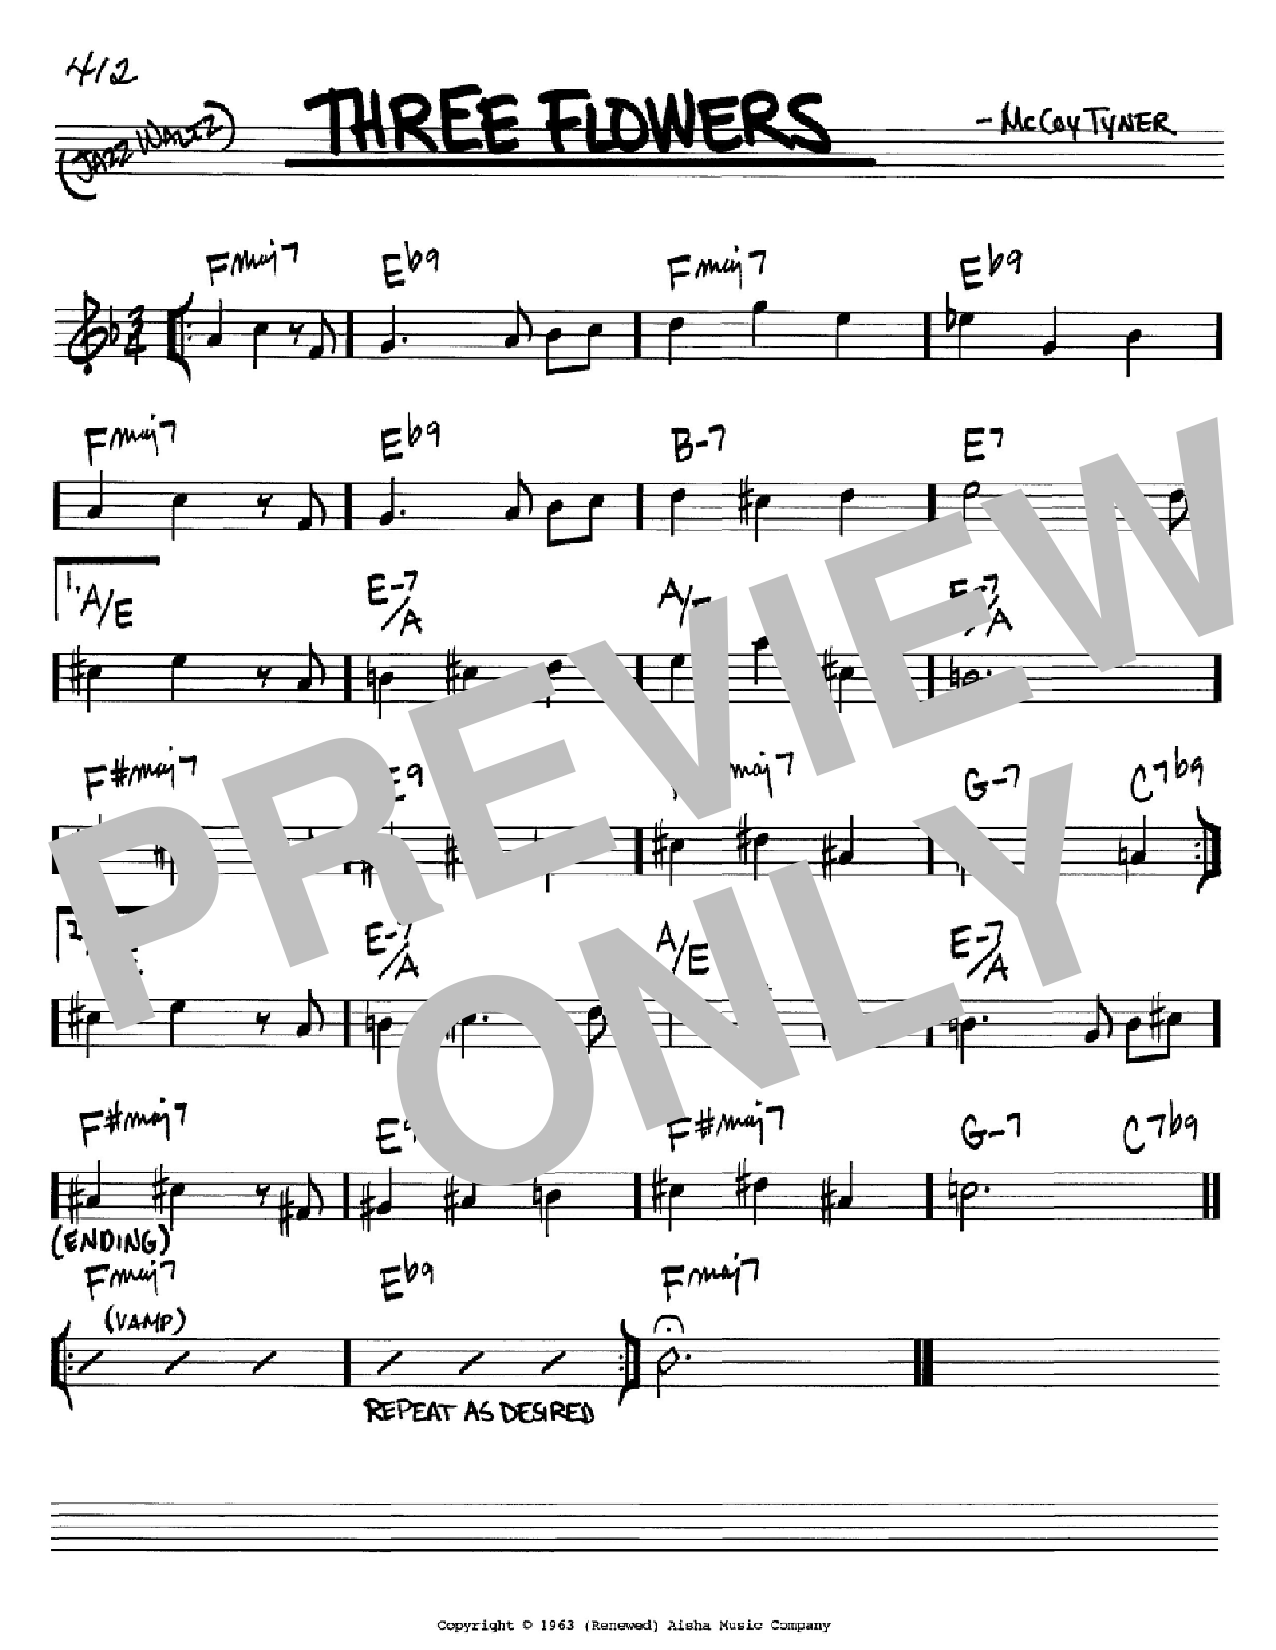 McCoy Tyner Three Flowers sheet music notes and chords. Download Printable PDF.